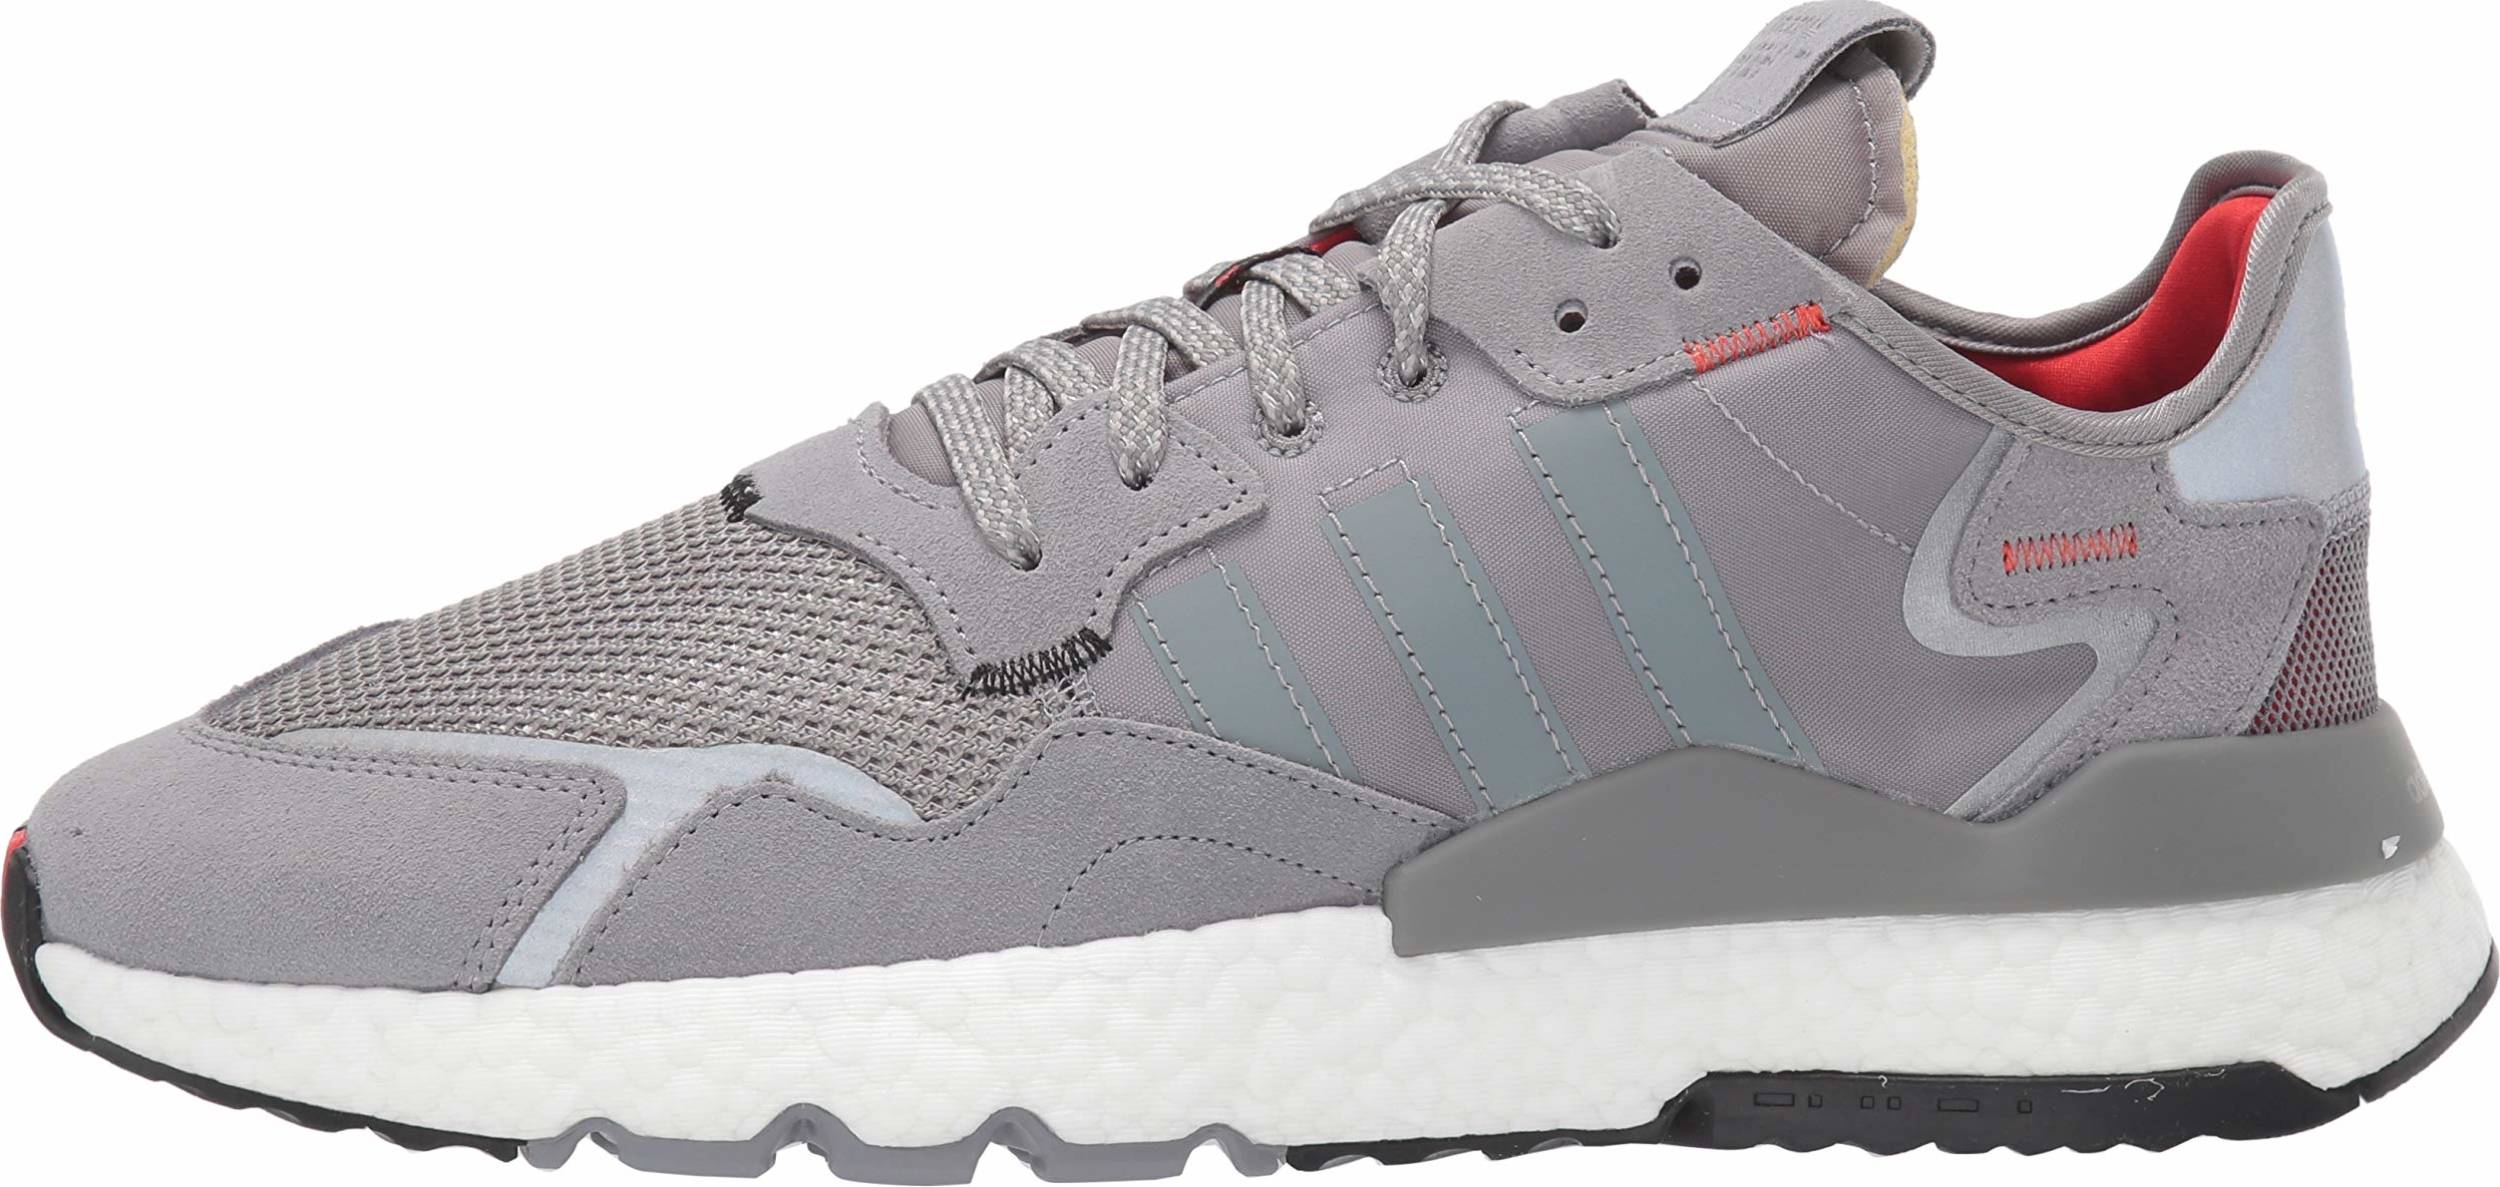 Save 59% on Grey Sneakers (759 Models 